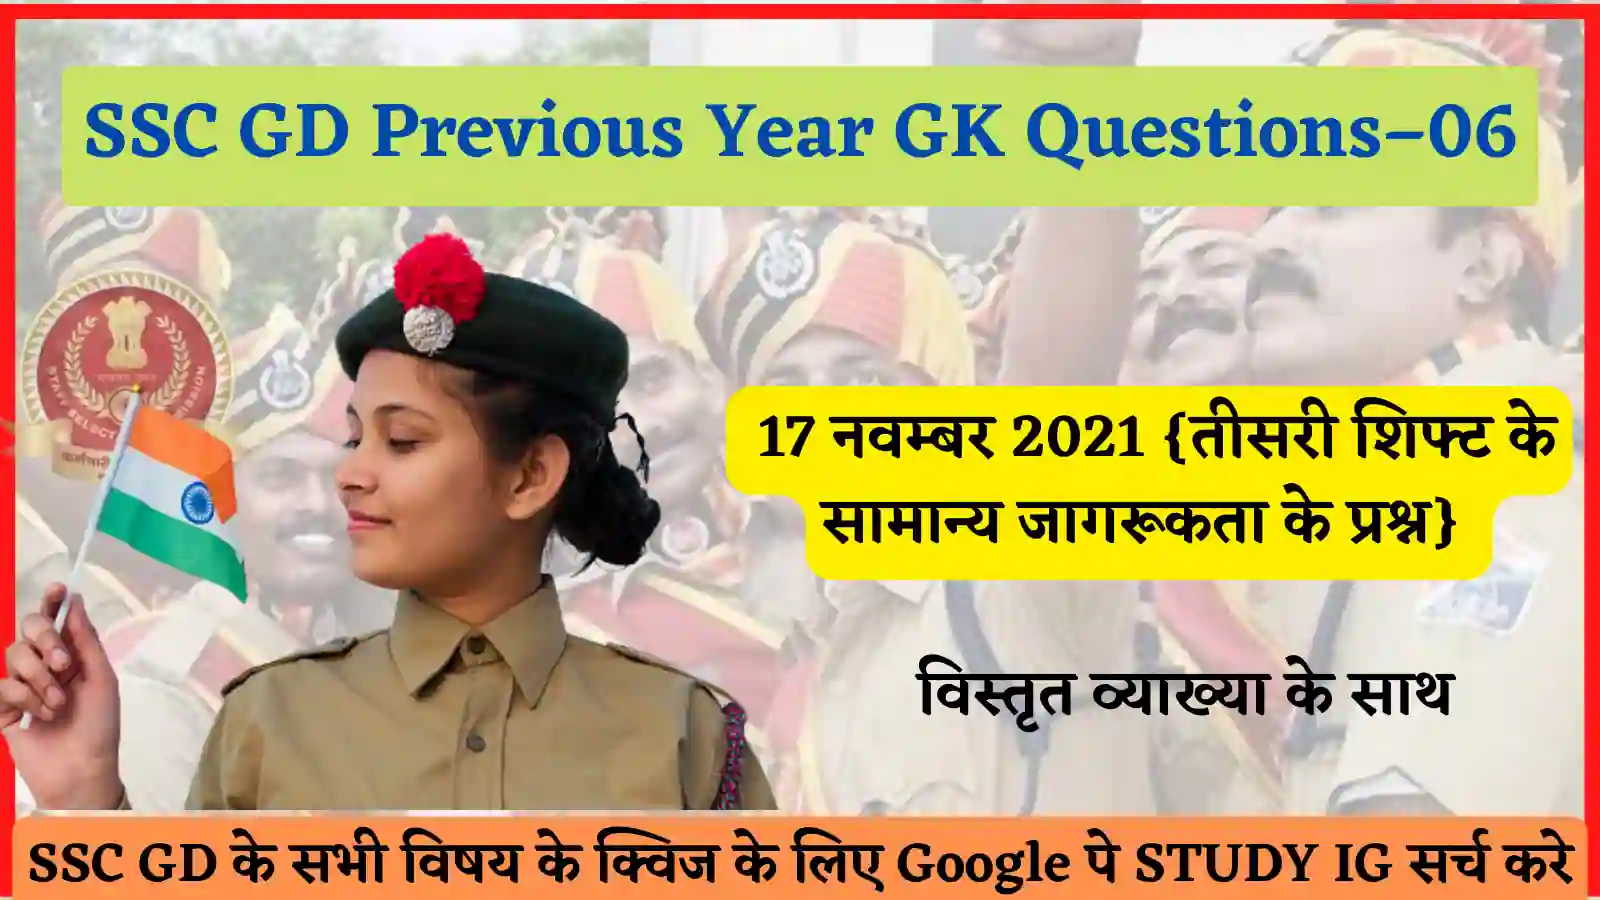 SSC GD Previous Year GK Questions/Quiz - 06